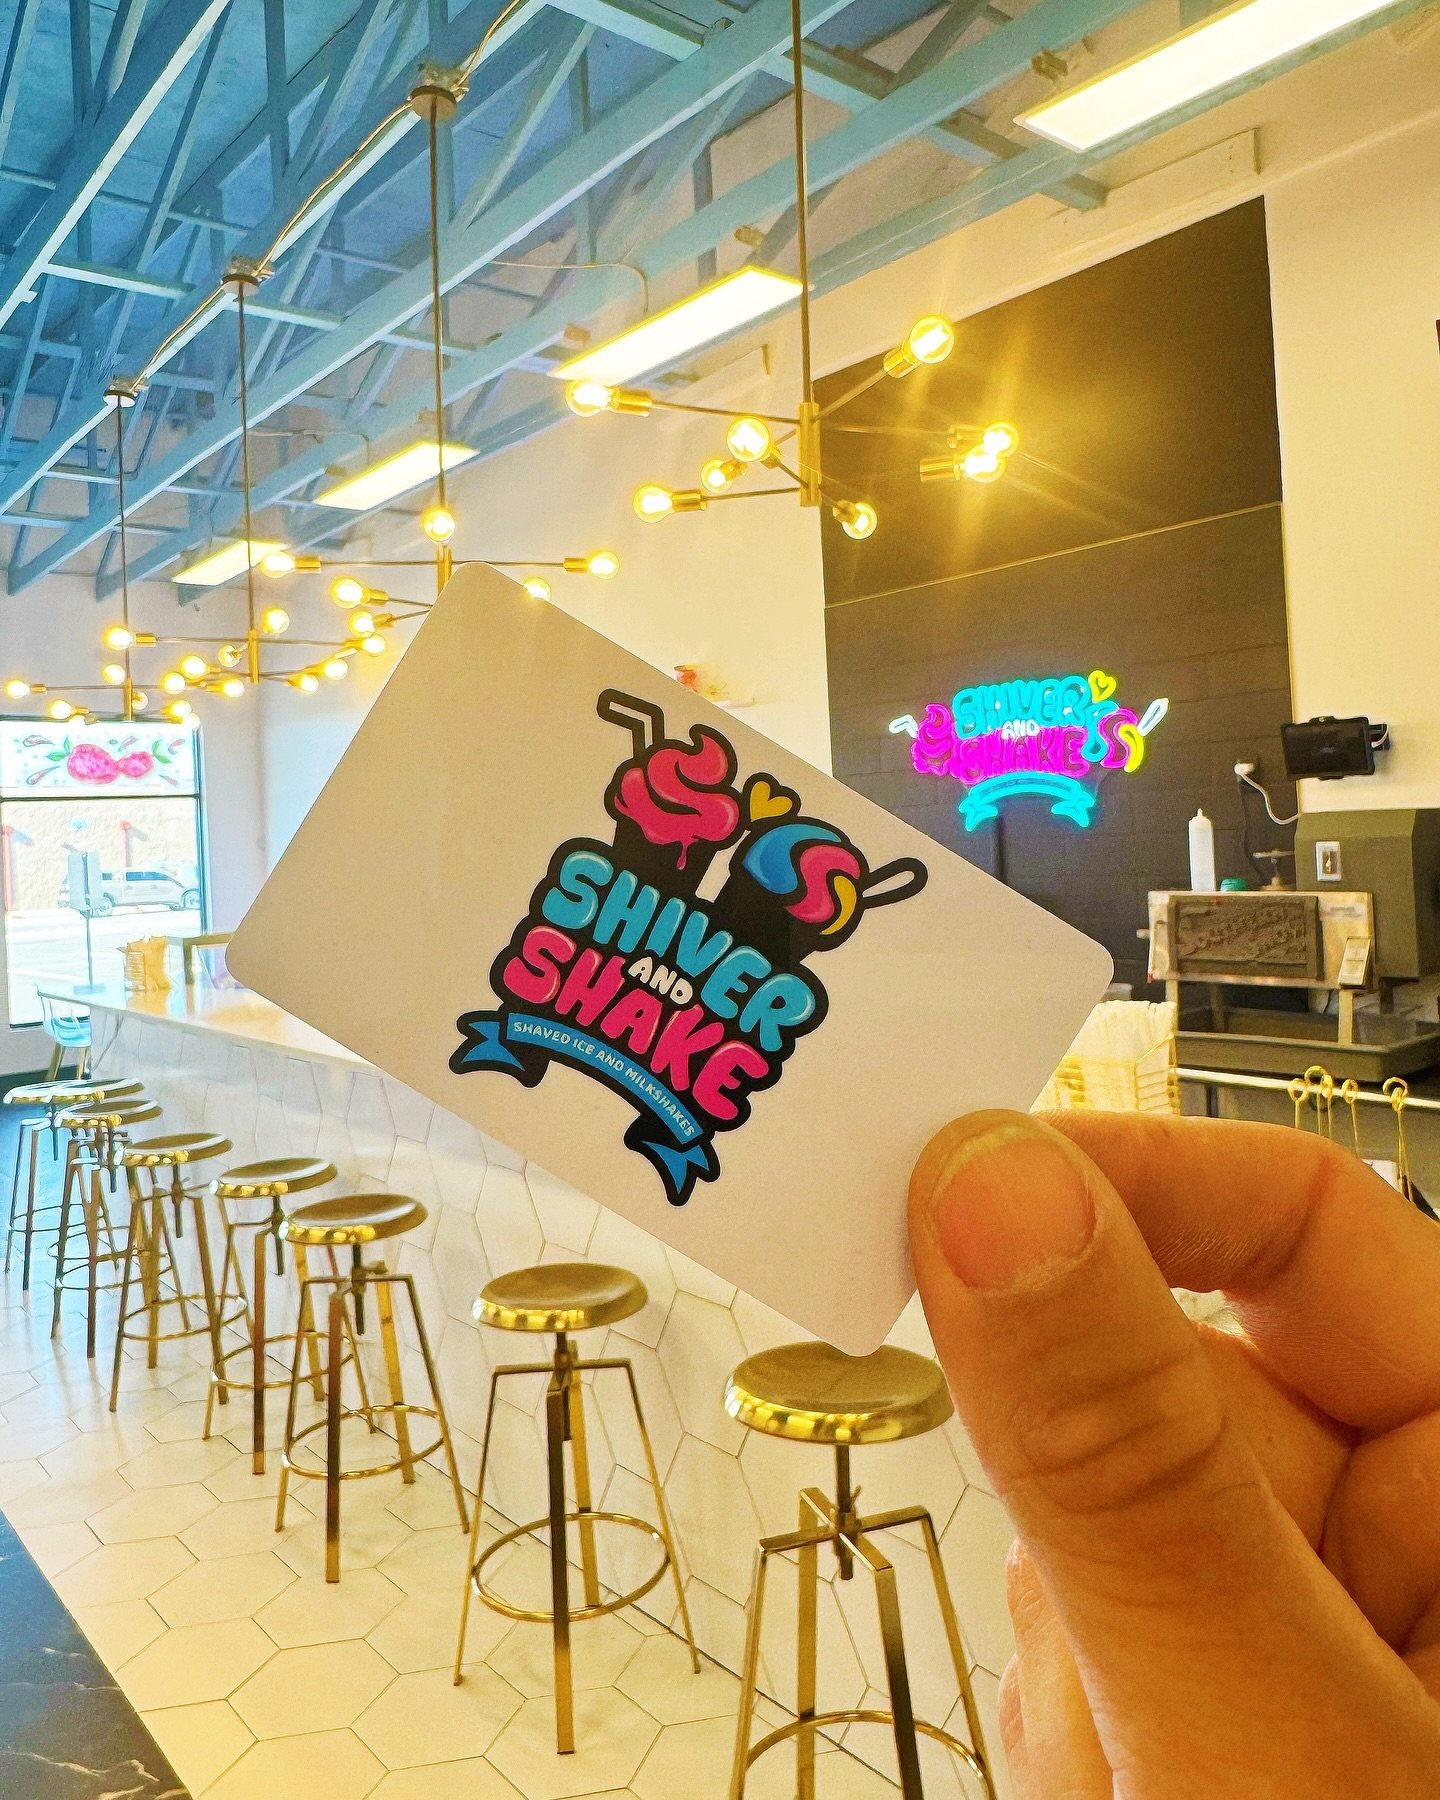 🎉 Give the gift of sweetness! Our new gift cards are perfect for graduations, birthdays, or any special occasion. Treat your loved ones to the best milkshakes and shaved ice in town! 🎁🍧🥤